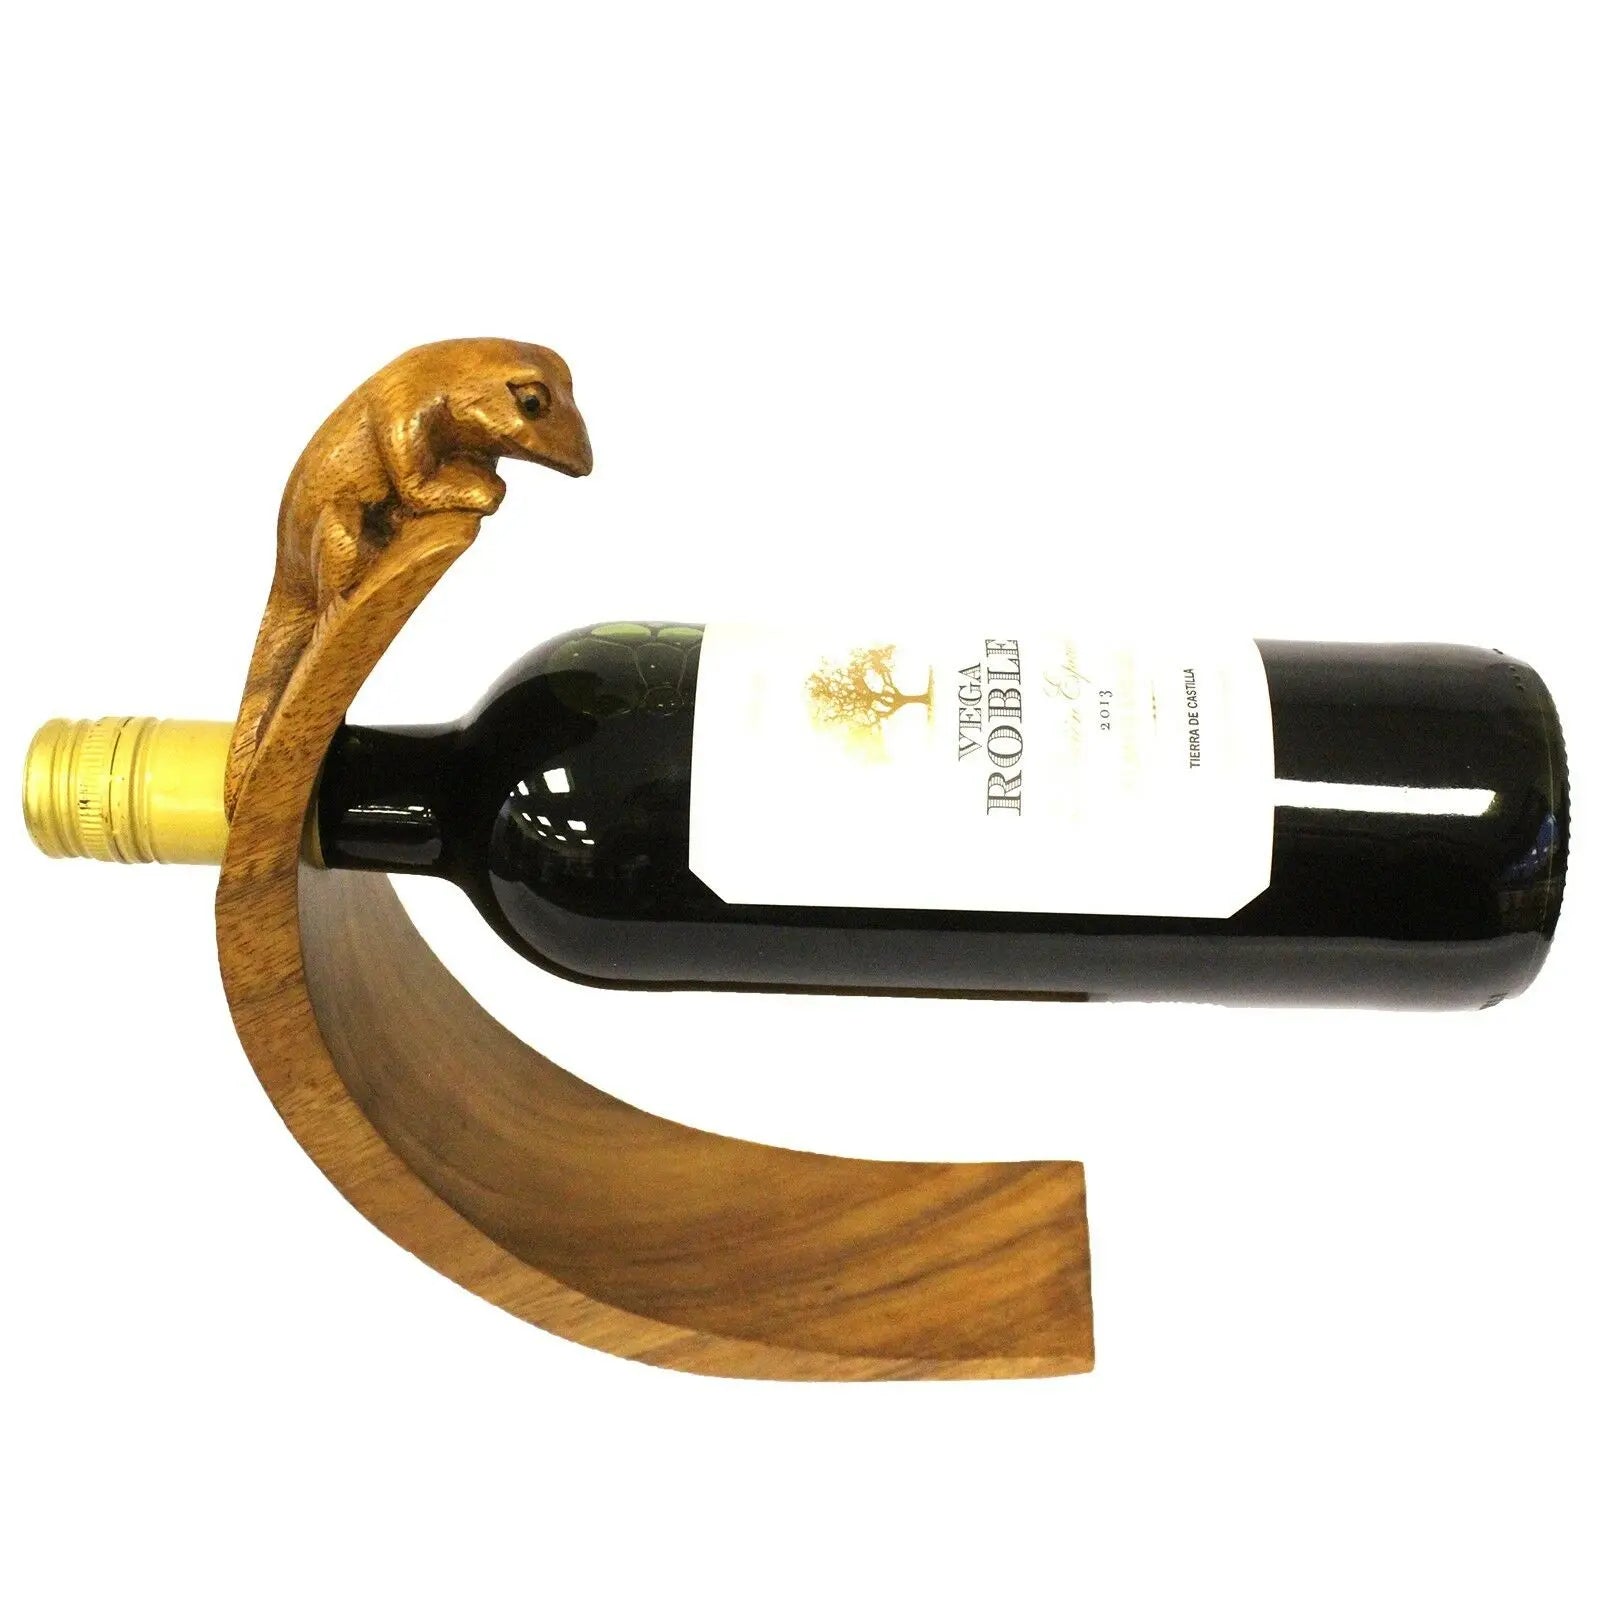 Suar Wood Balance hand-made Wine Holders-GECKO-PERFECT GIFT Unbranded